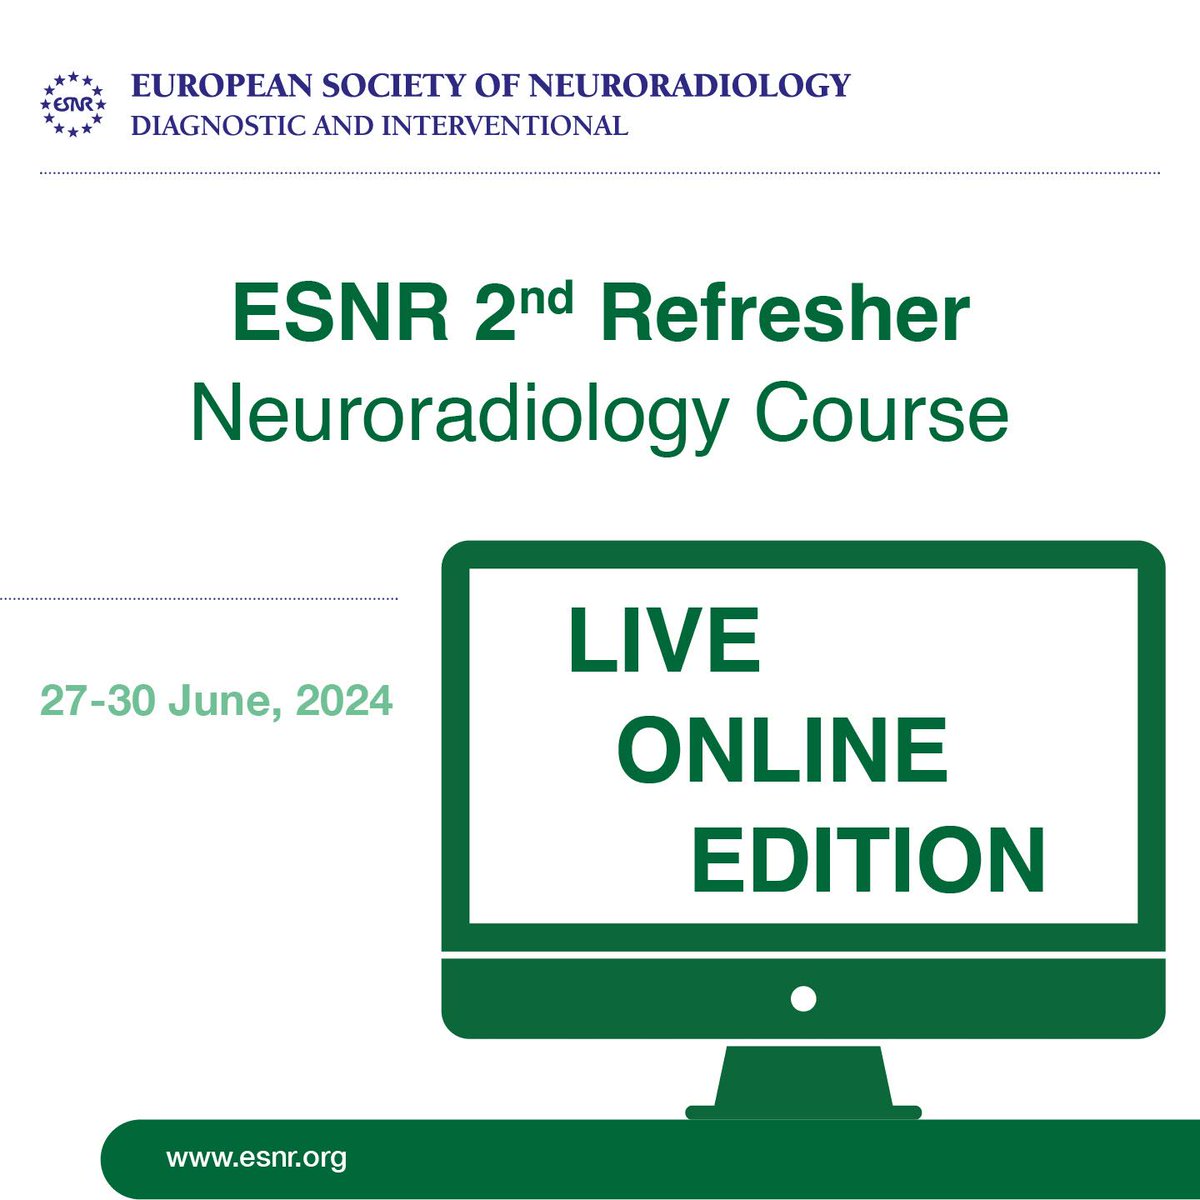 ESNR 2nd Refresher Neuroradiology Course 📅 27-30/06/24 🌐 Online Info and registration available here: ow.ly/TlGl50R506y #Neurorad #ThisIsESNR